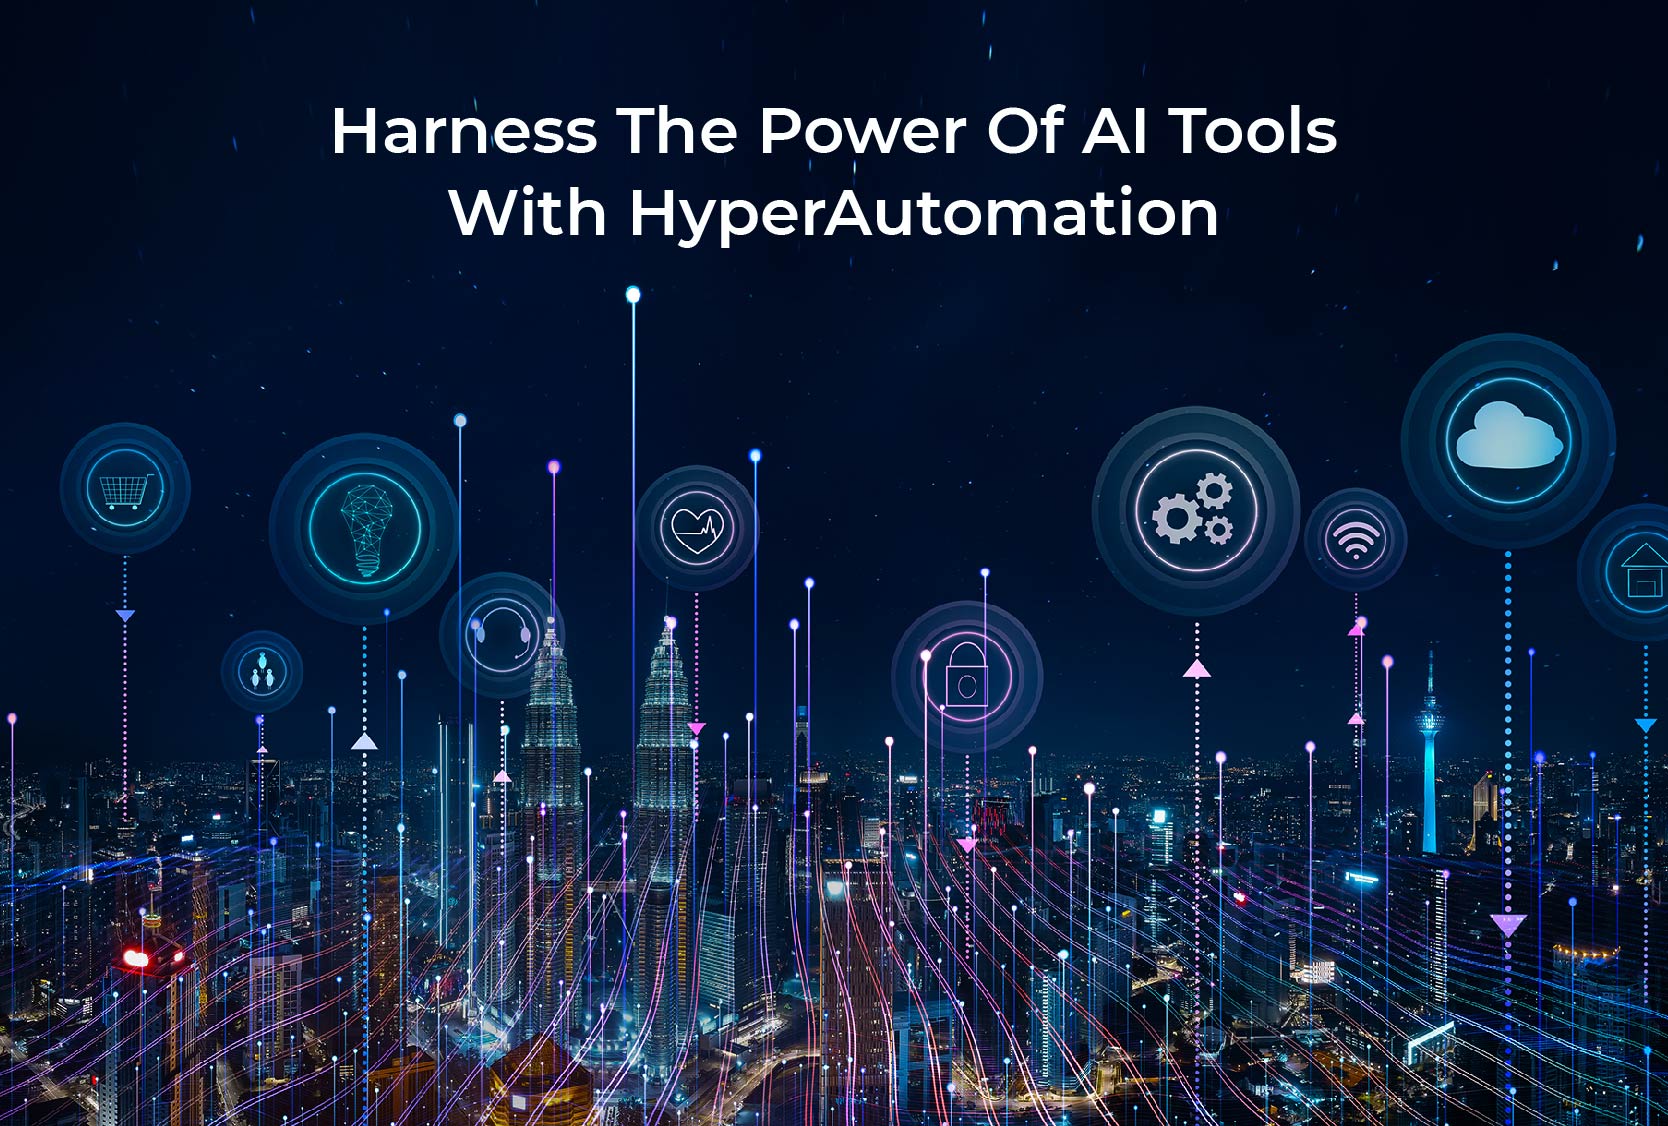 Harness The Power Of AI Tools With HyperAutomation